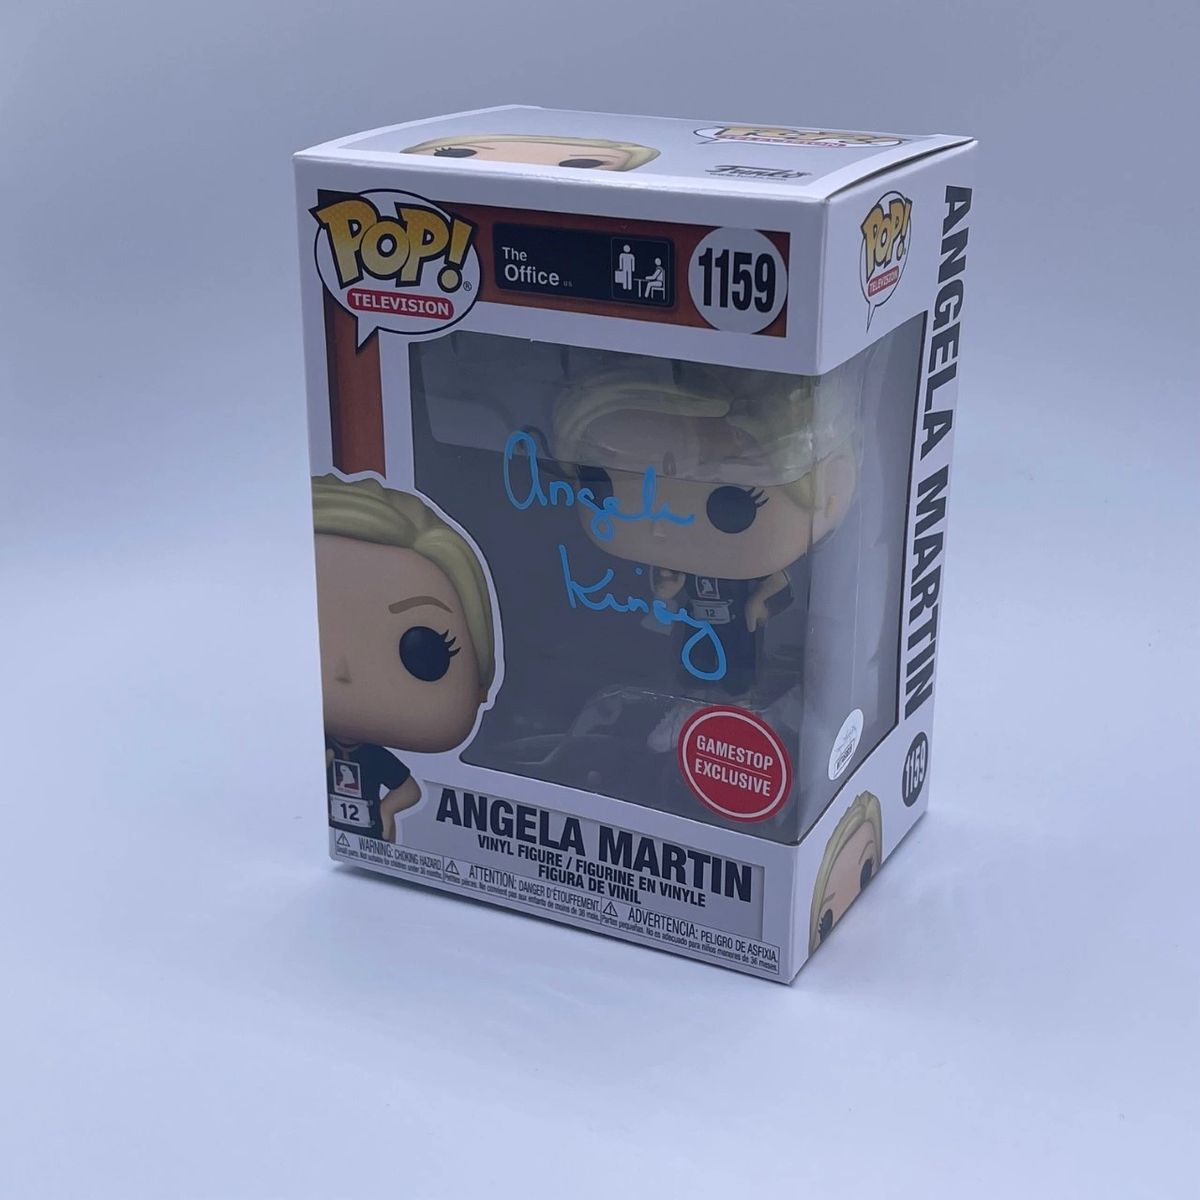 IN-STOCK ANGELA KINSEY AUTOGRAPHED FUNKO POP (ANGELA MARTIN /GAME STOP  EXCLUSIVE) #1159